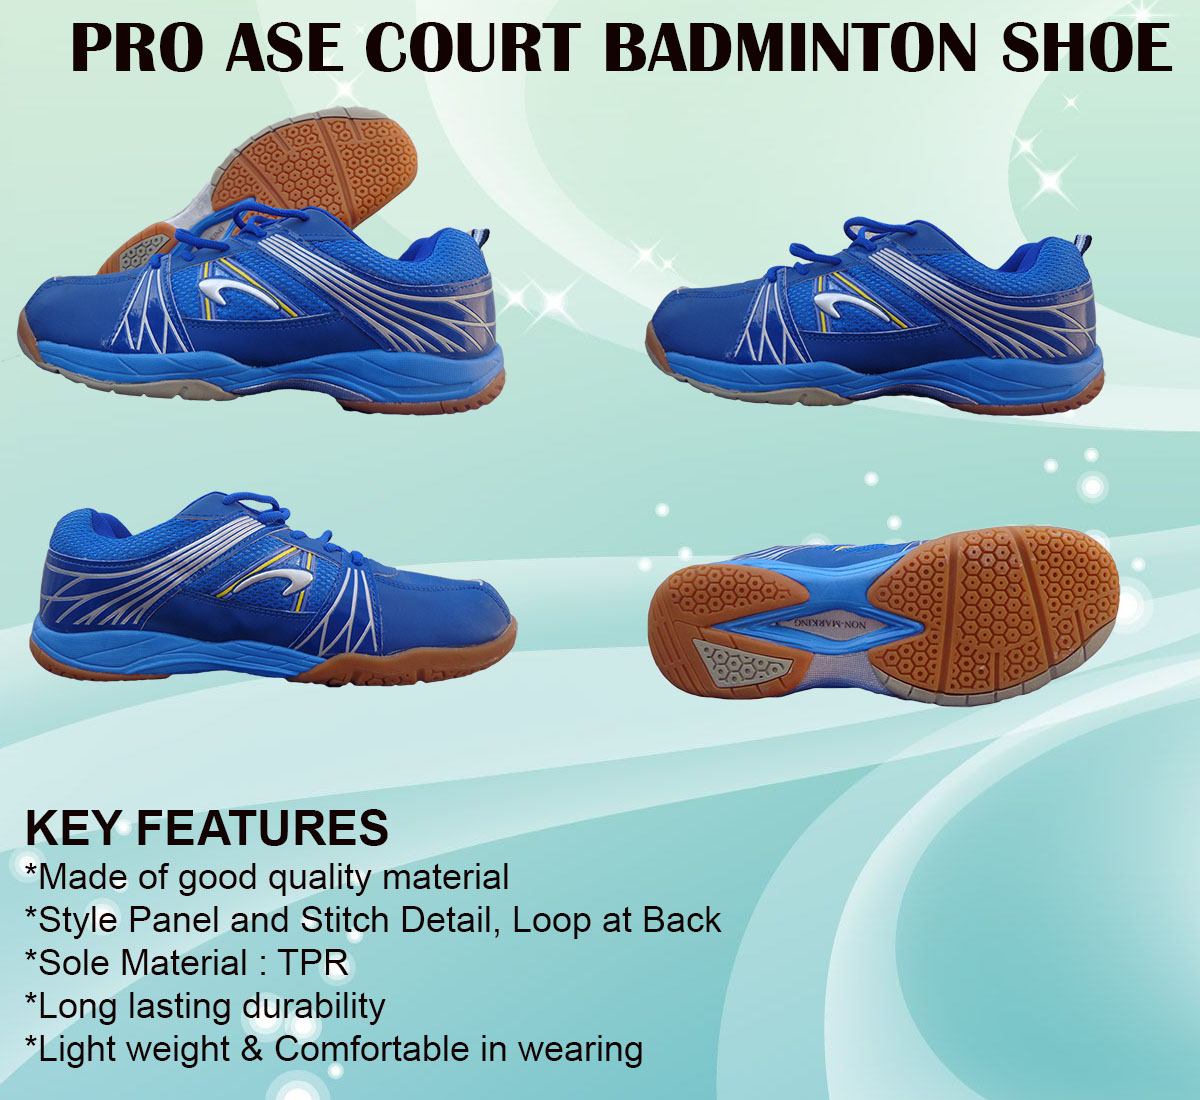 Badminton Archives - Page 20 of 30 - Khelmart.org | It's all about Sports.